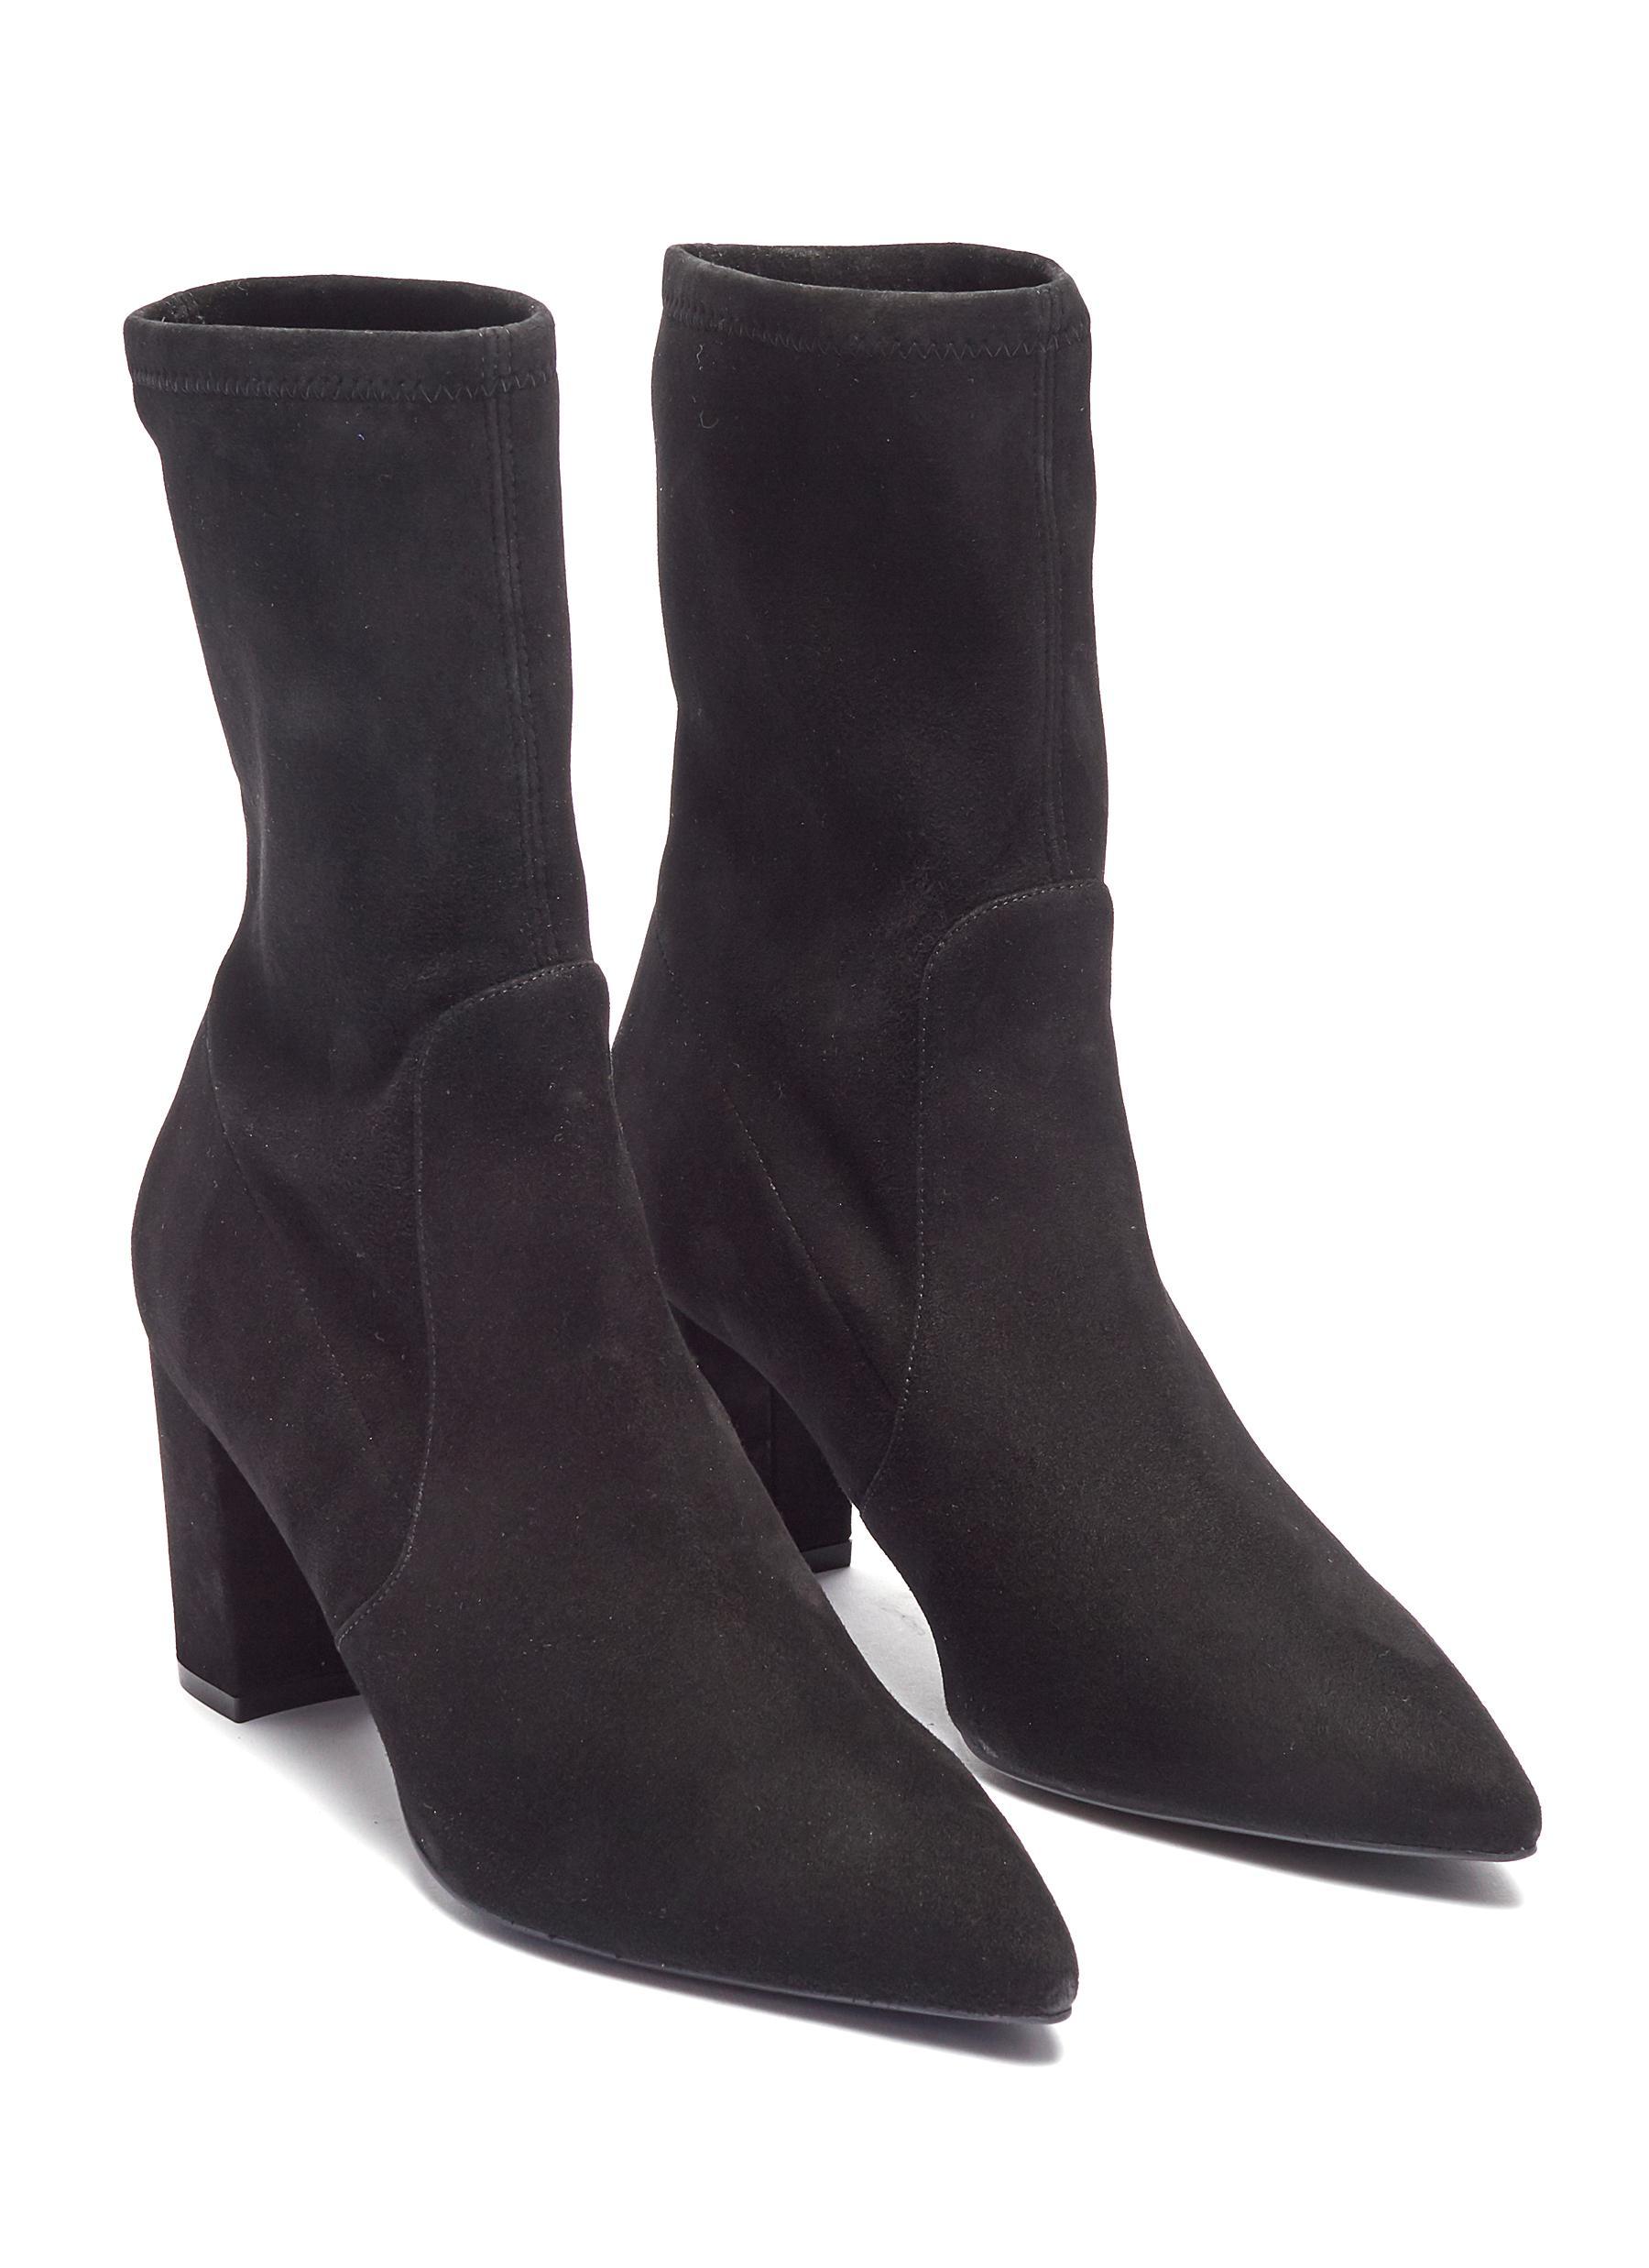 Stuart Weitzman 'landry' Stretch Suede Panelled Ankle Boots in Black ...